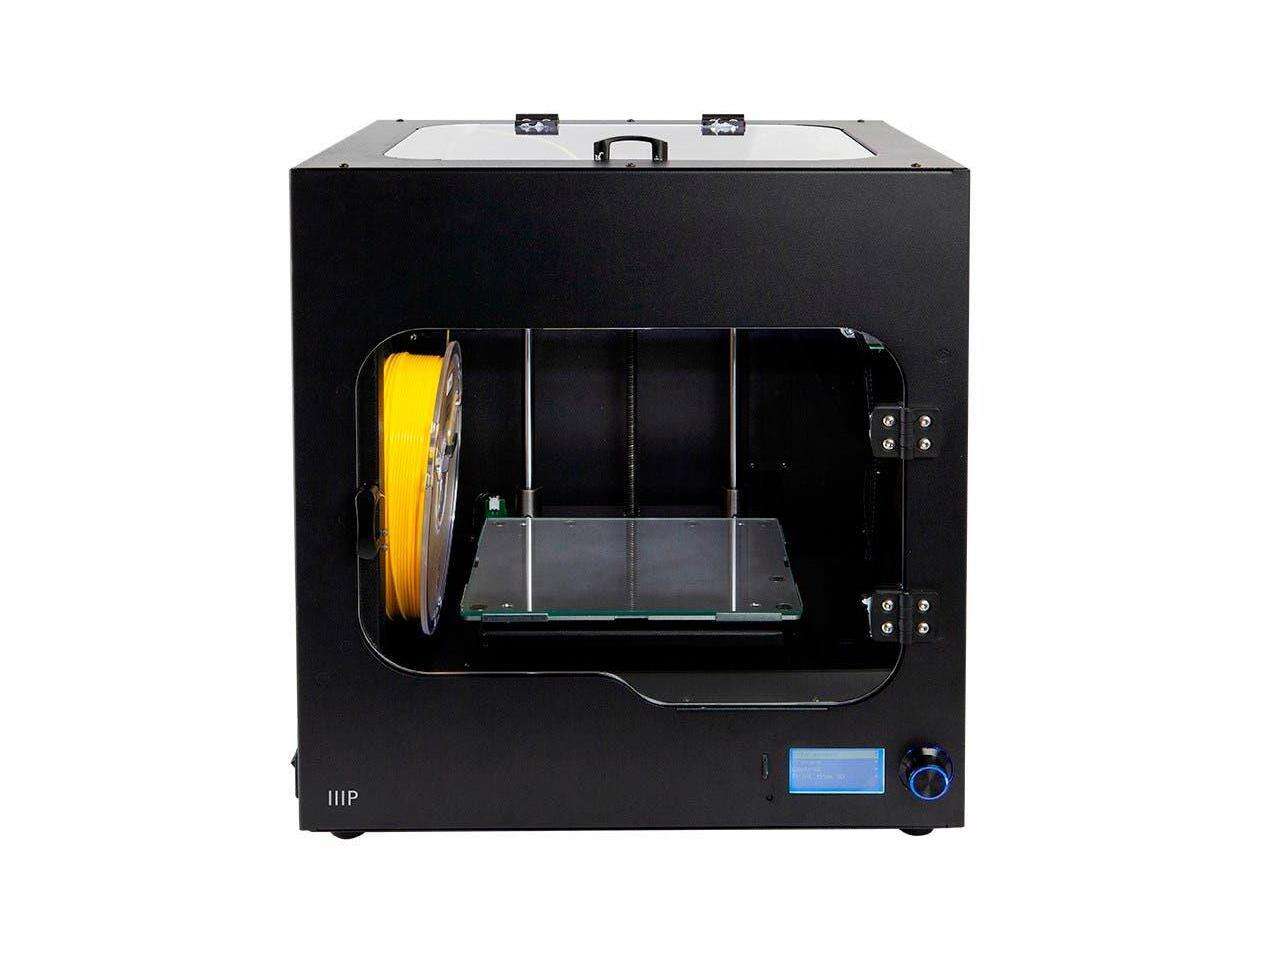 Monoprice Maker Ultimate 2 3D Printer - with (200 x 150 x 150 mm) Heated and Removable Glass Built Plate, Auto Bed Leveling, Internal Lighting & Built-in Filament Detector